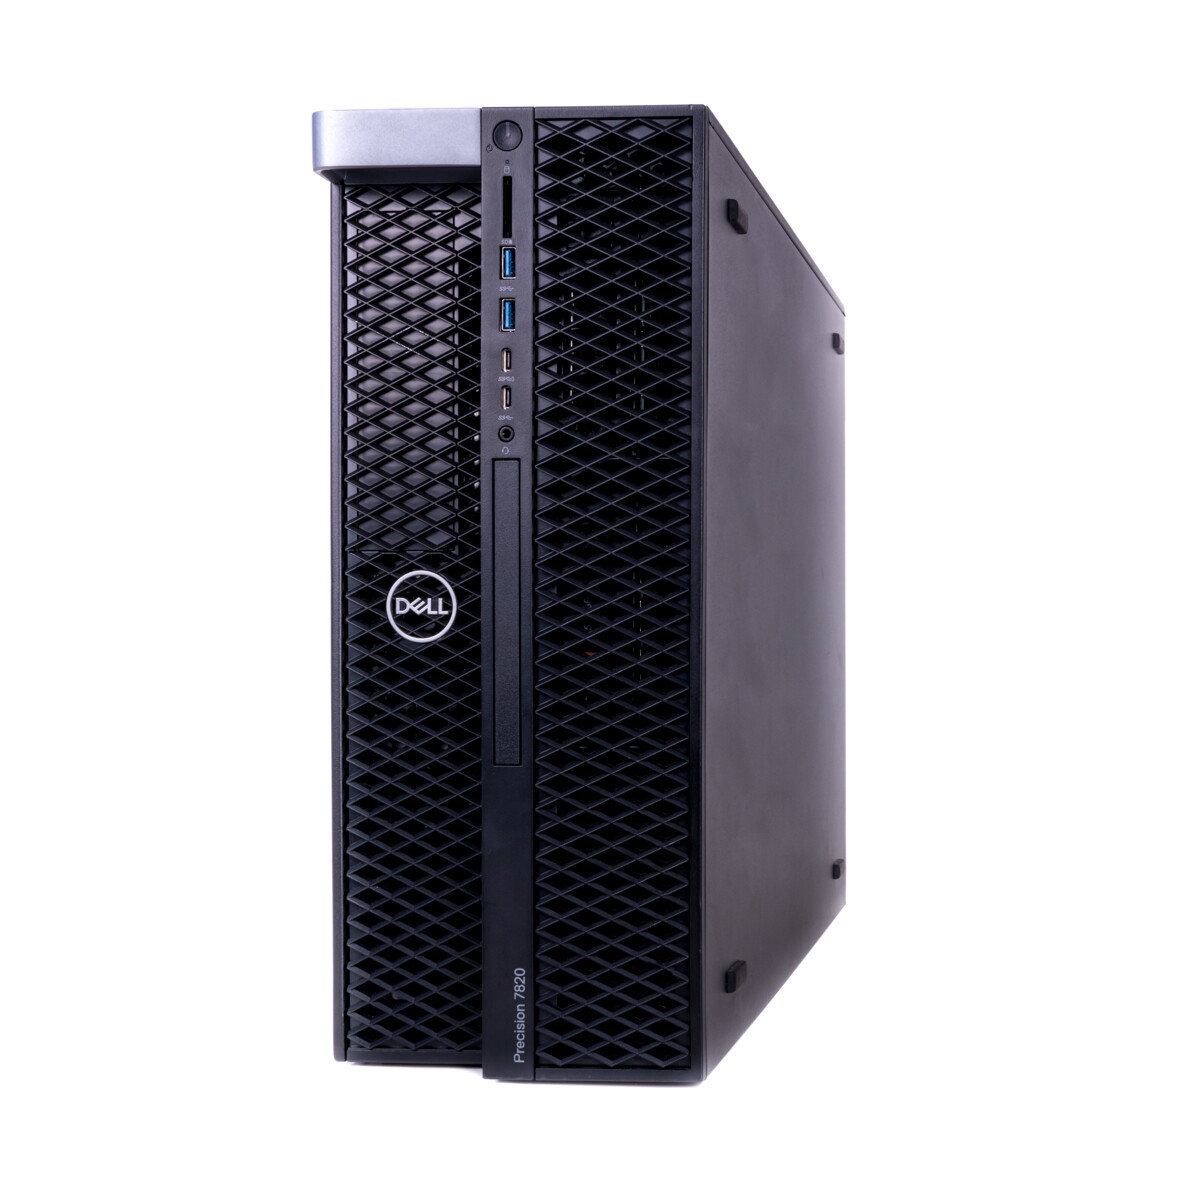 Dell Precision 7820 Tower Workstation example - click to zoom